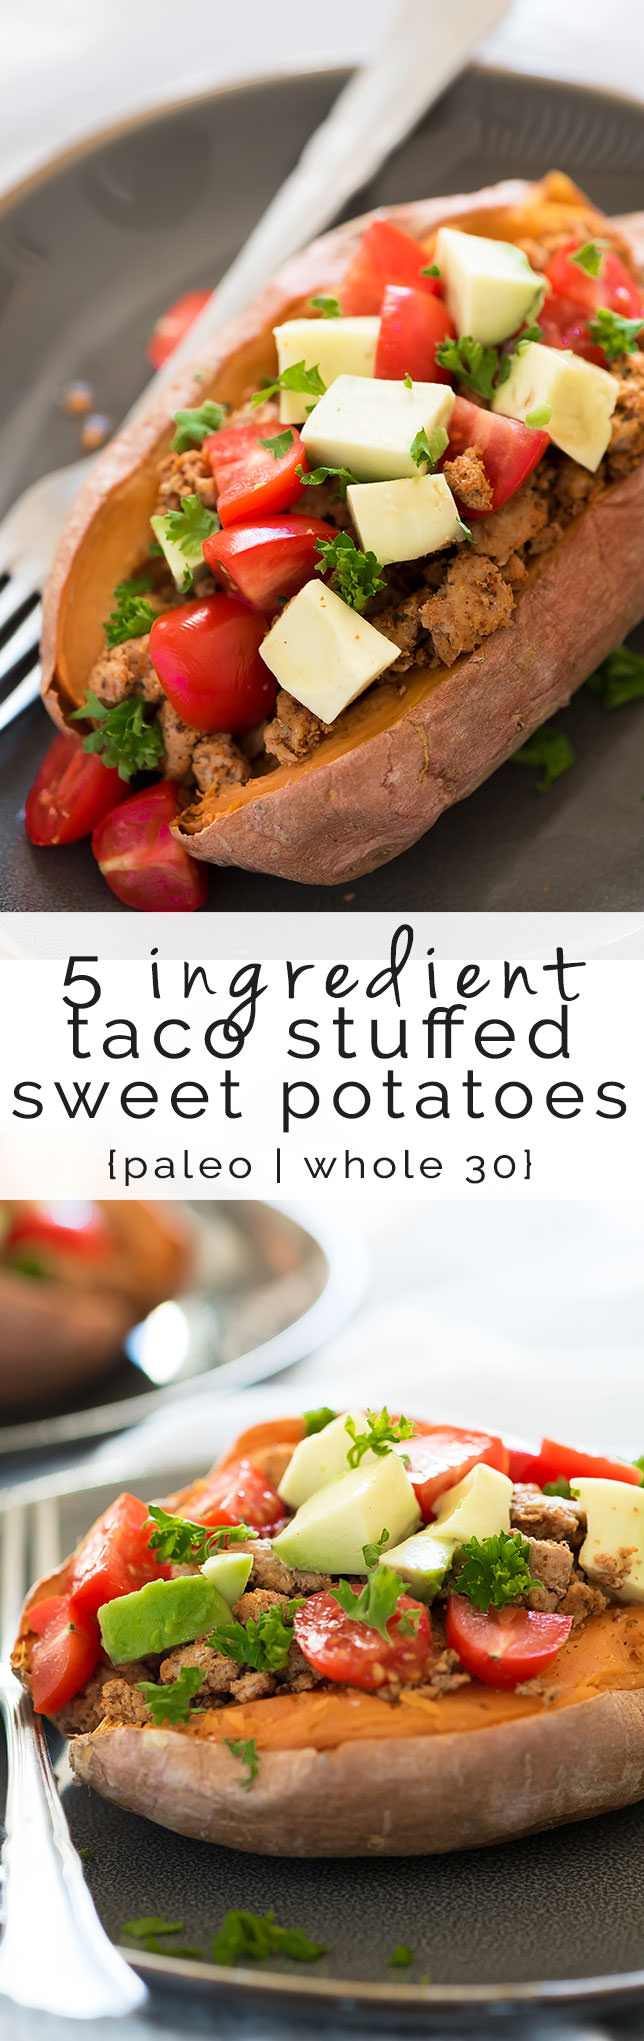 Stuffed sweet potatoes, healthy, recipes, paleo, whole 30, turkey, taco, Mexican, easy, southwest, baked, avocado, 21 day fix, clean, dairy free